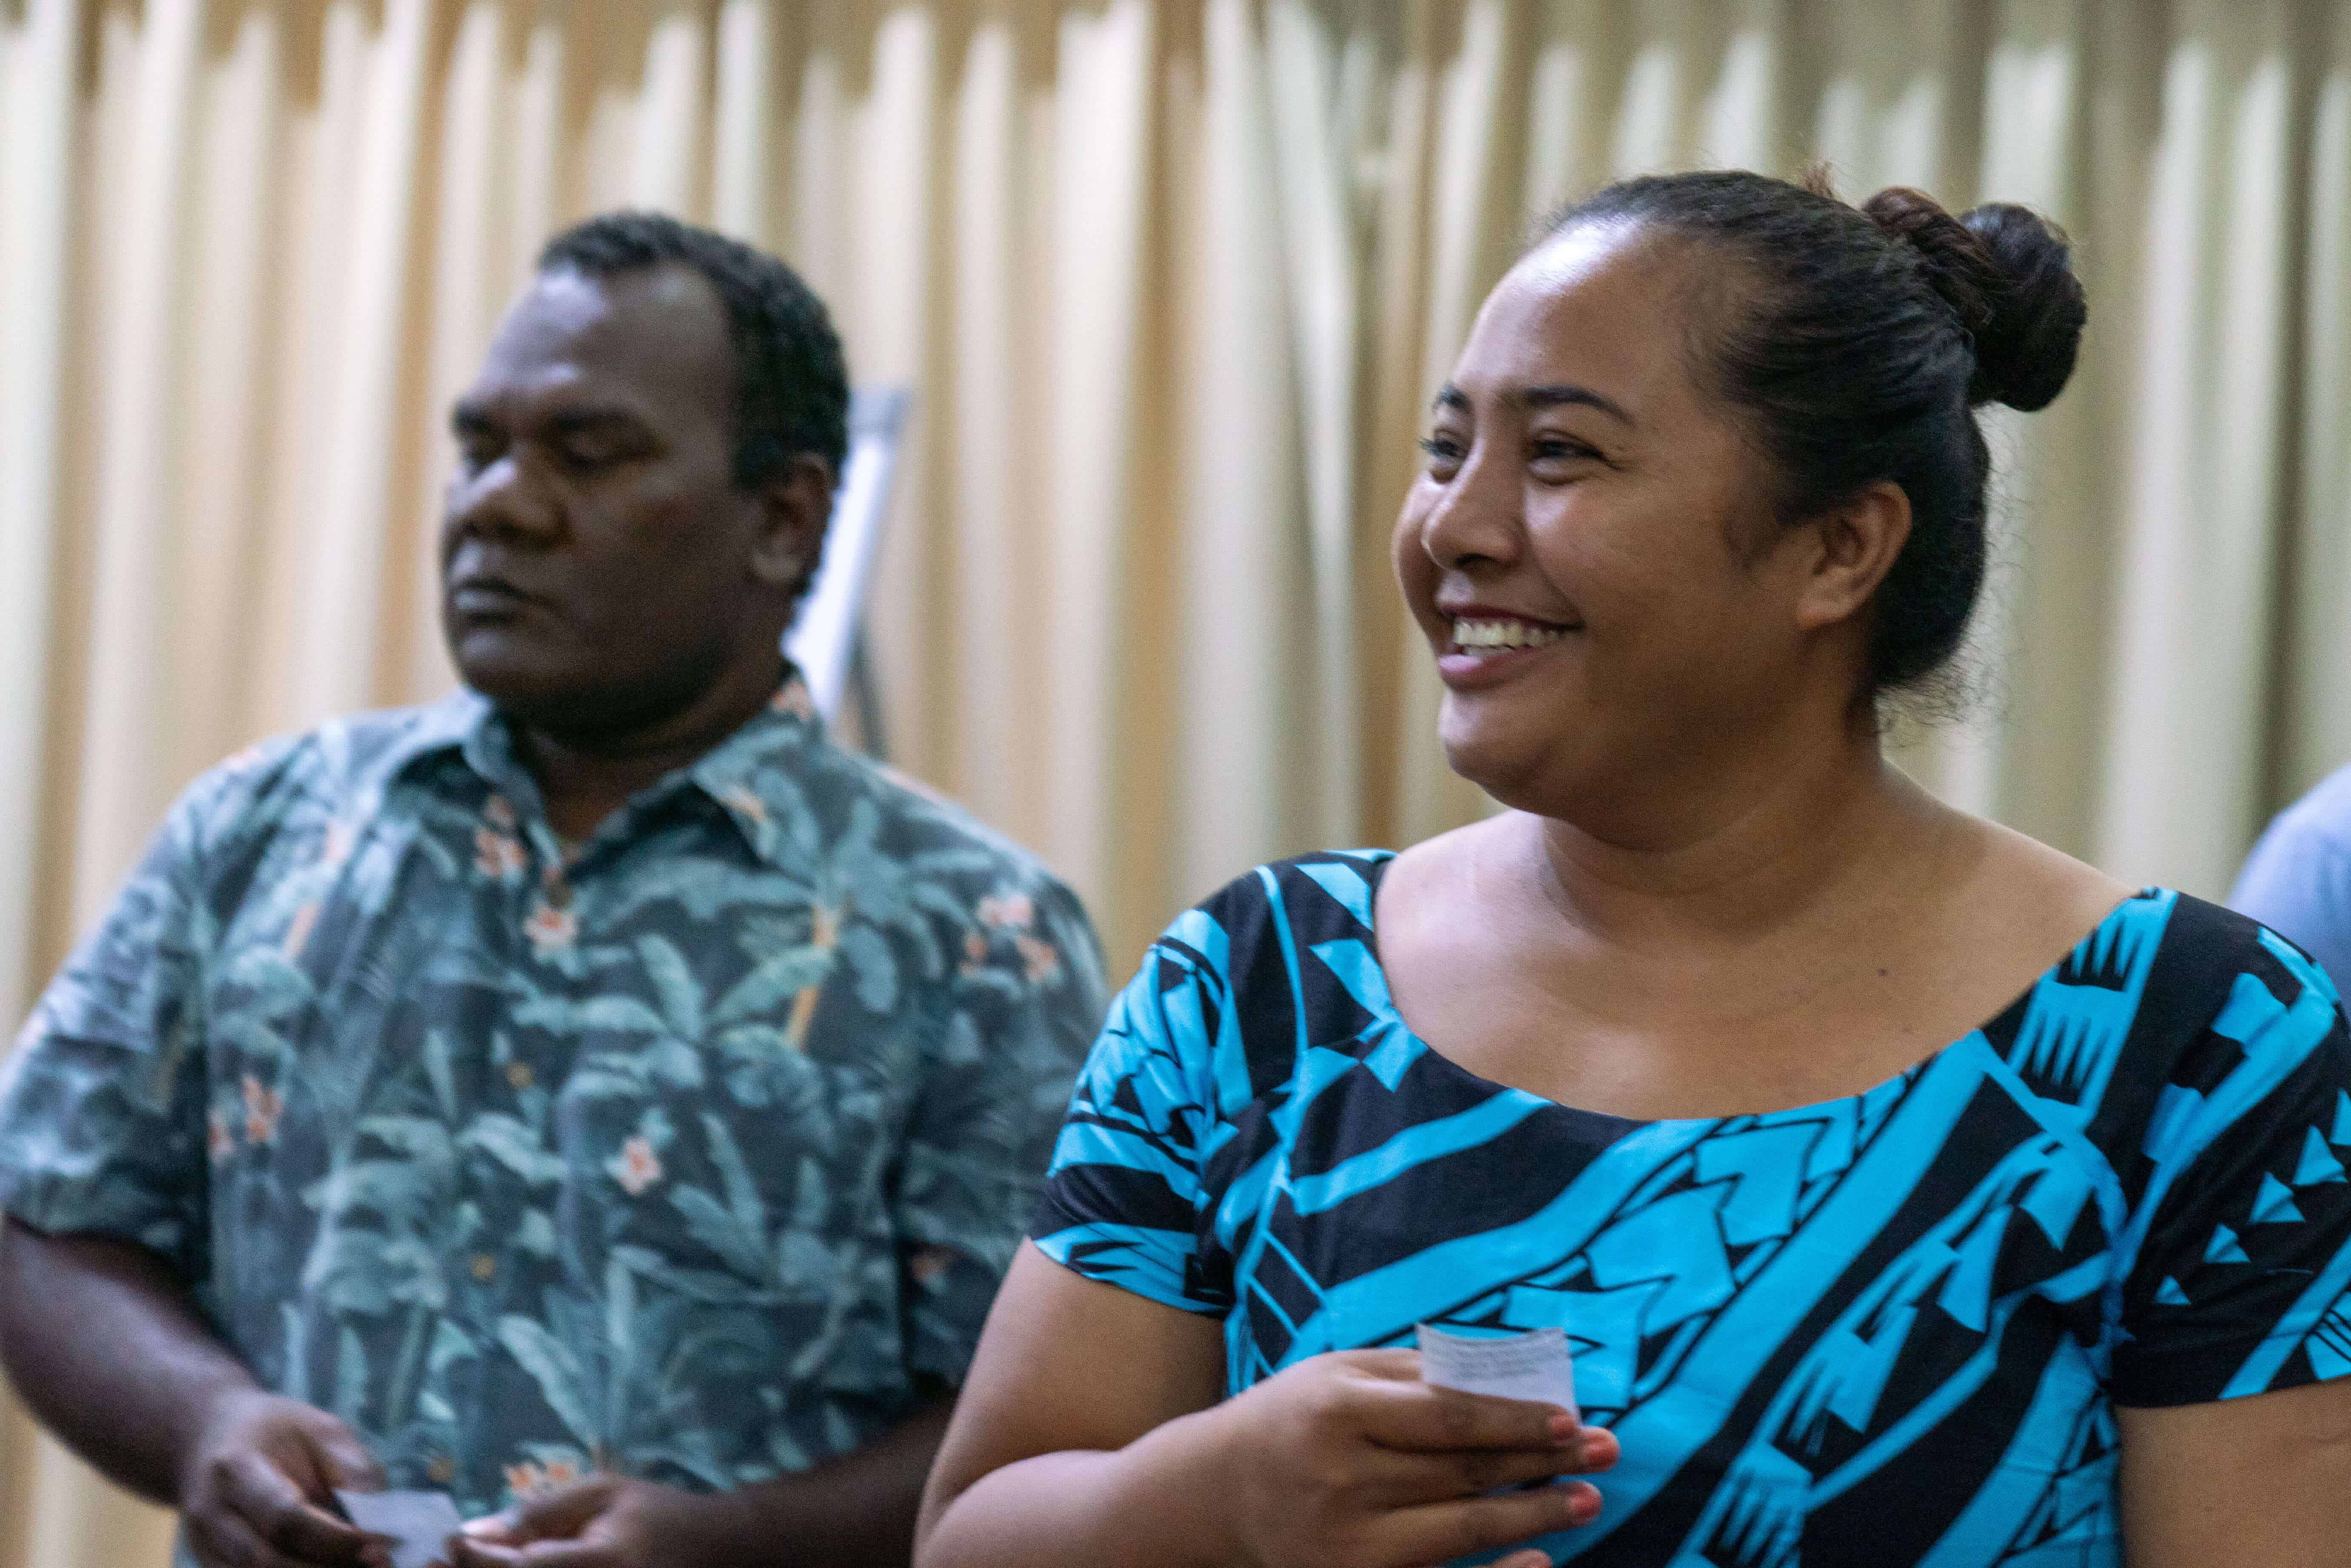 Two Pacific Island peoples smiling